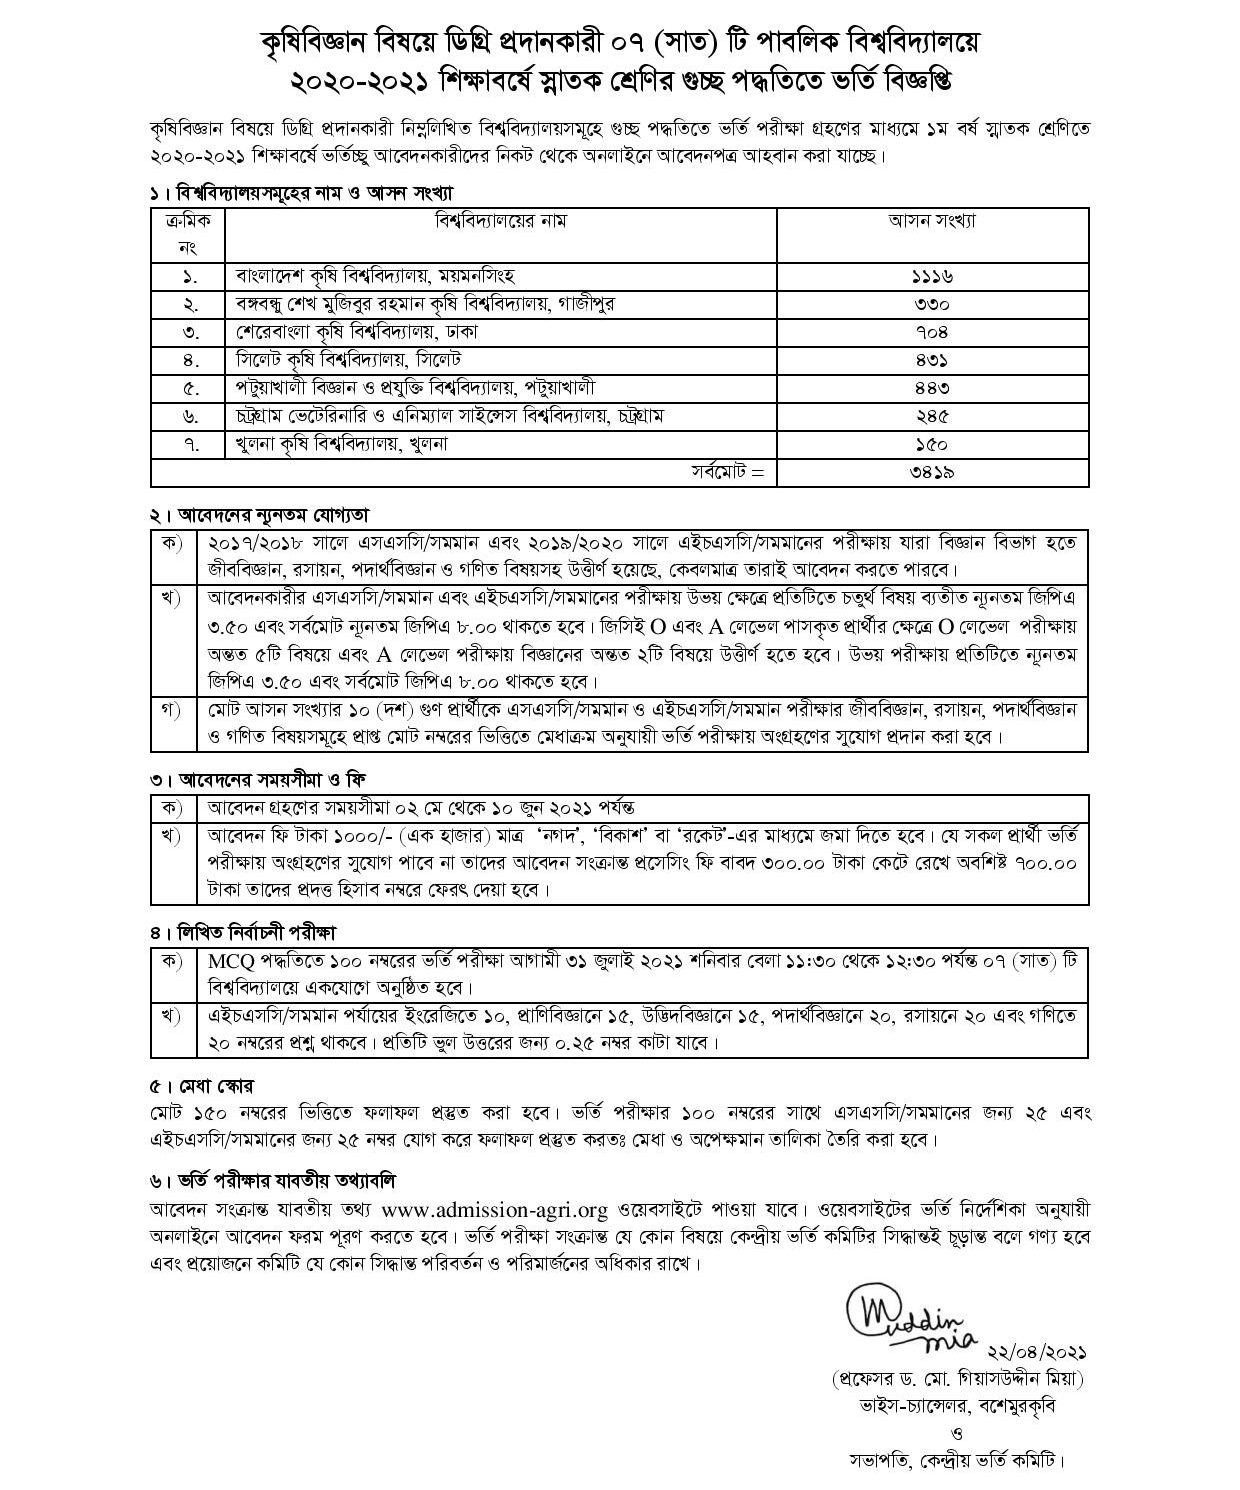 Agricultural University admi-notice-21-page-001